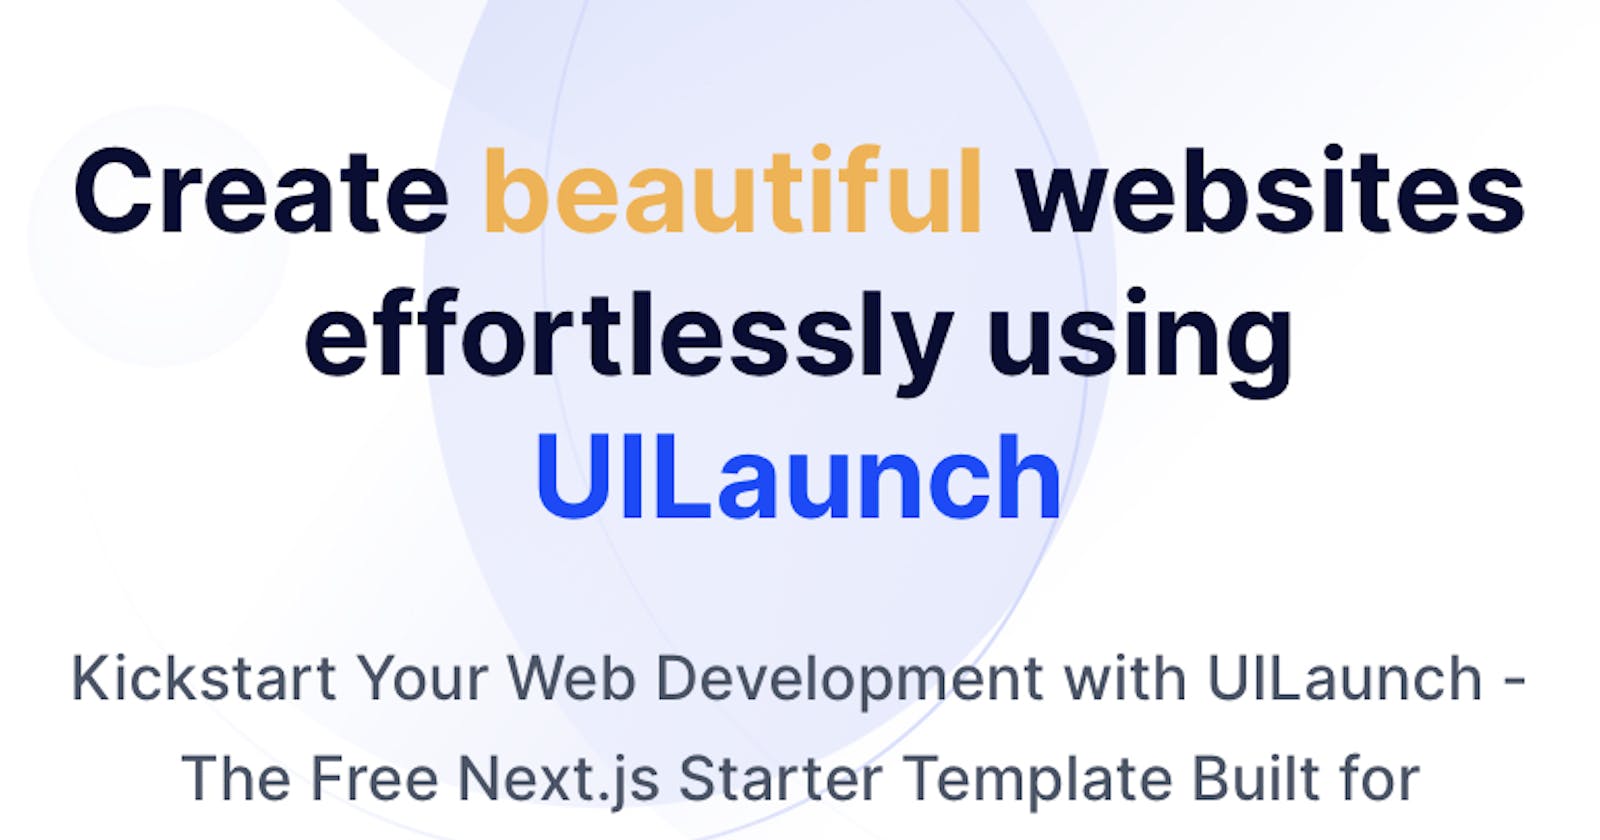 Supercharge Your Development with UIlaunch: The Ultimate Next.js Starter Template